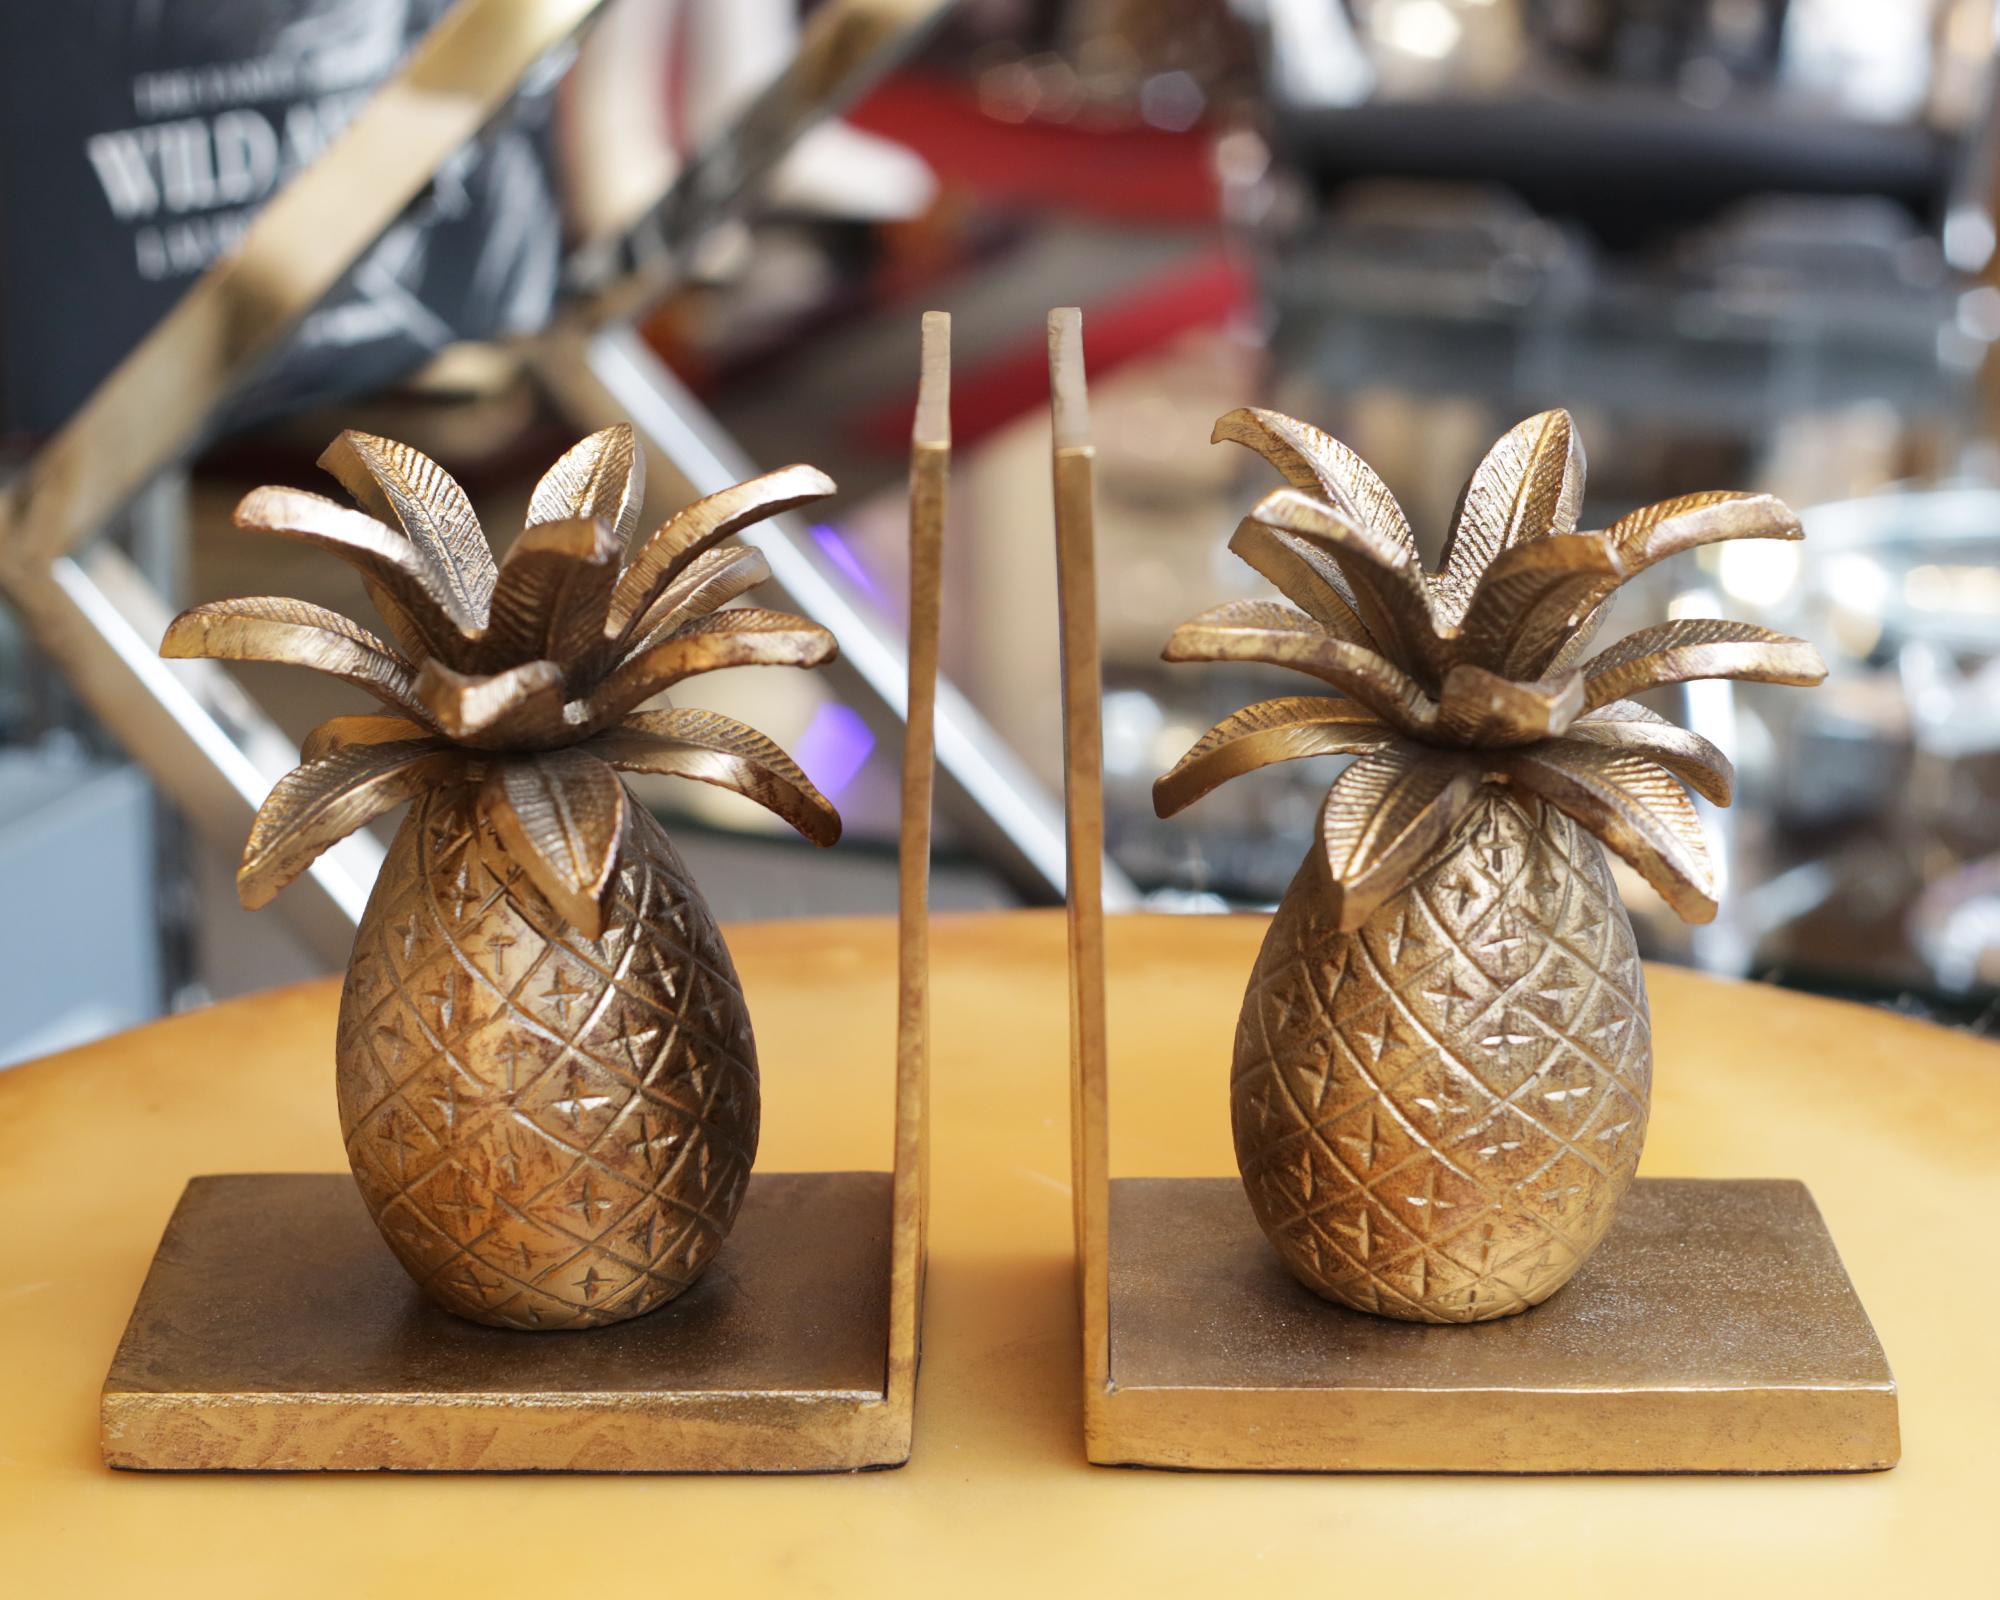 Bookends Pineapple set of 2 made in gilt
metal. On gilded metal base.
Measures: L 14 x D 9.5 x H 18cm each.